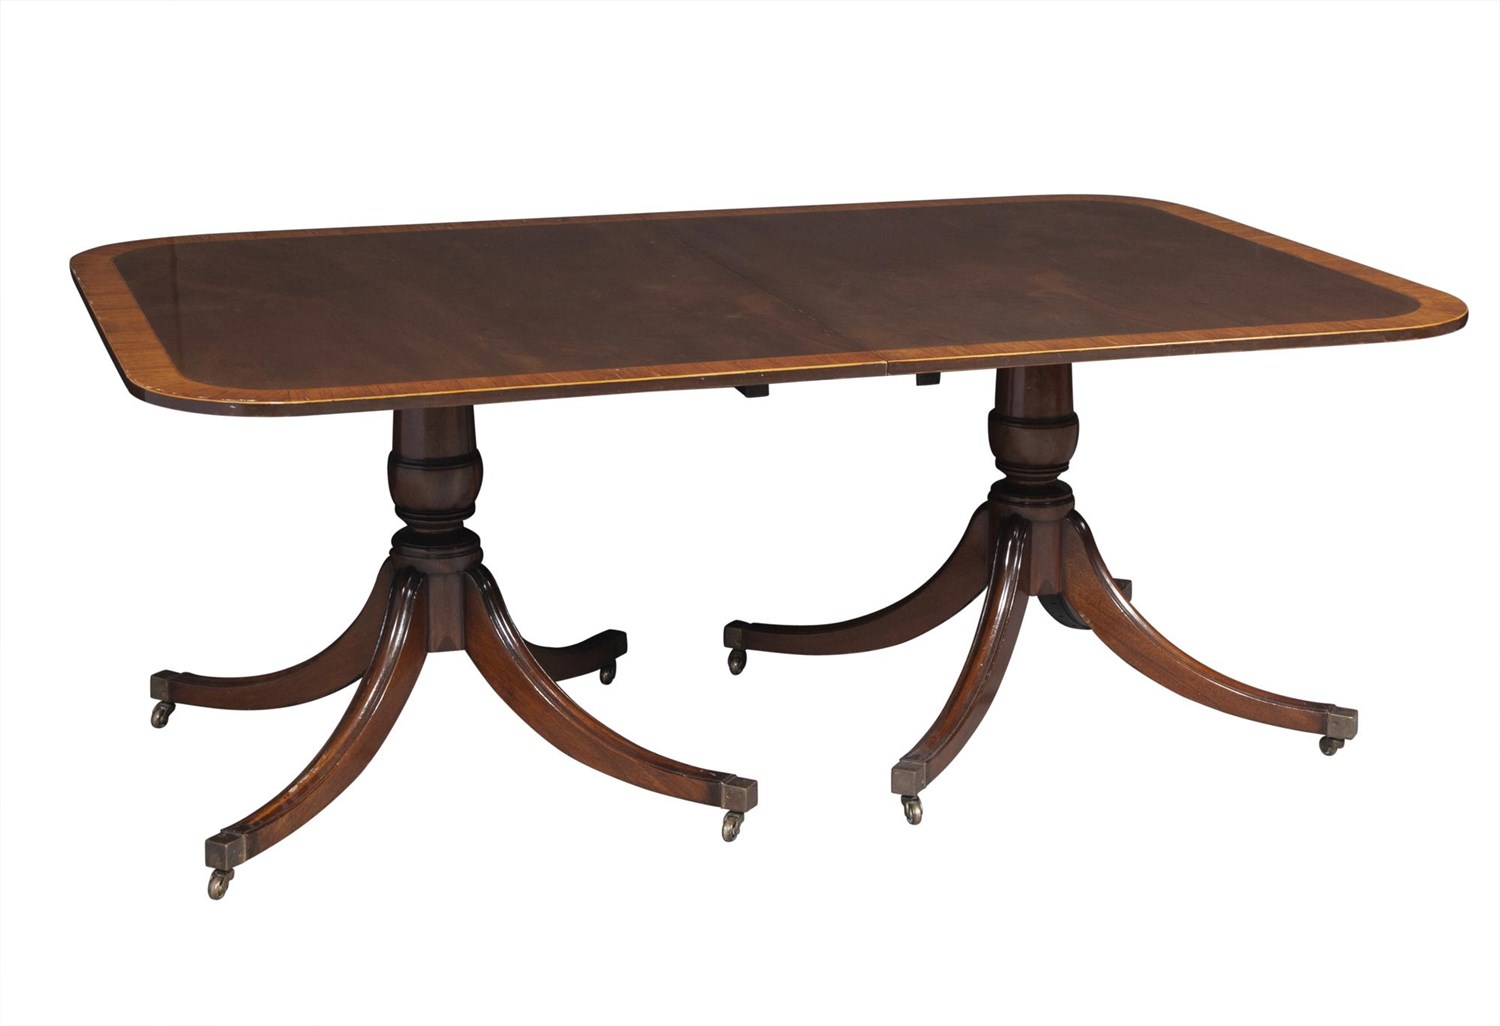 Lot 0 - George III Style Mahogany Two-Pedestal Dining Table